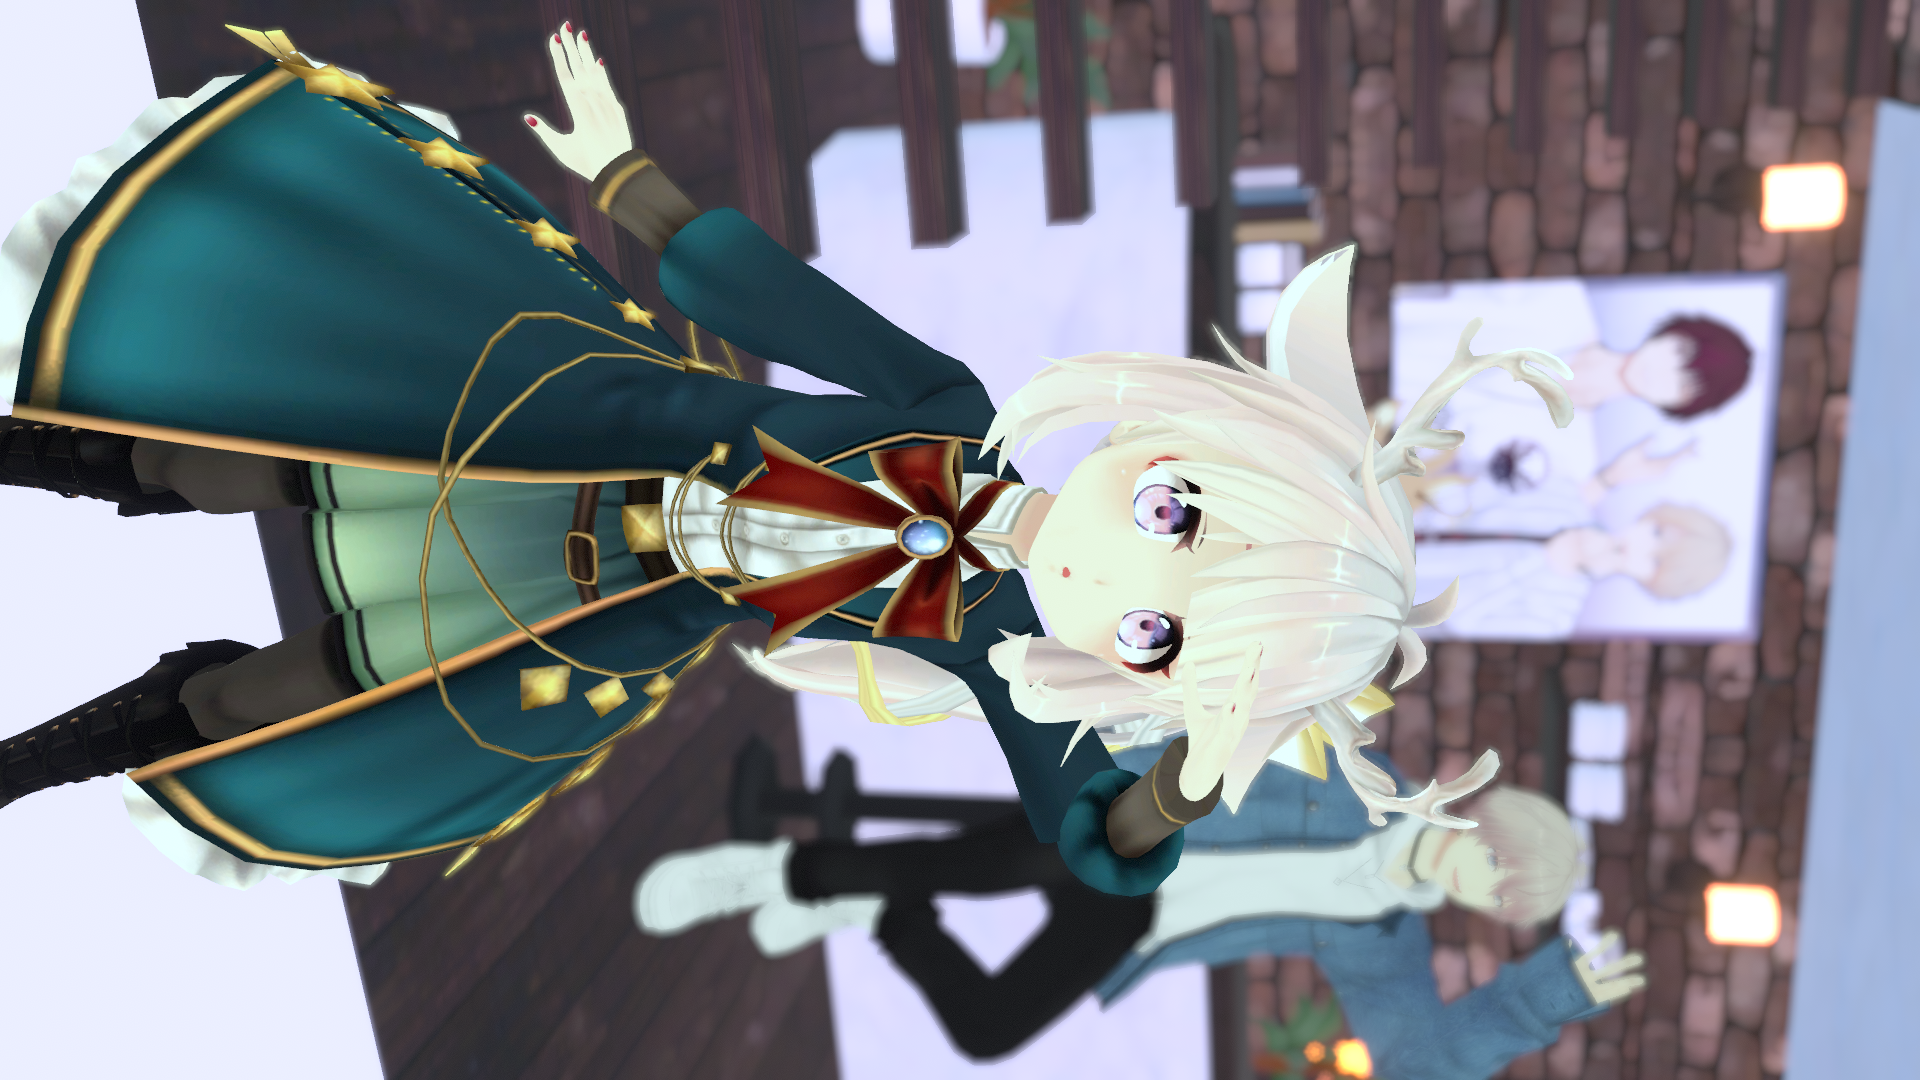 VRChat_1920x1080_2021-12-05_05-02-42.719.png